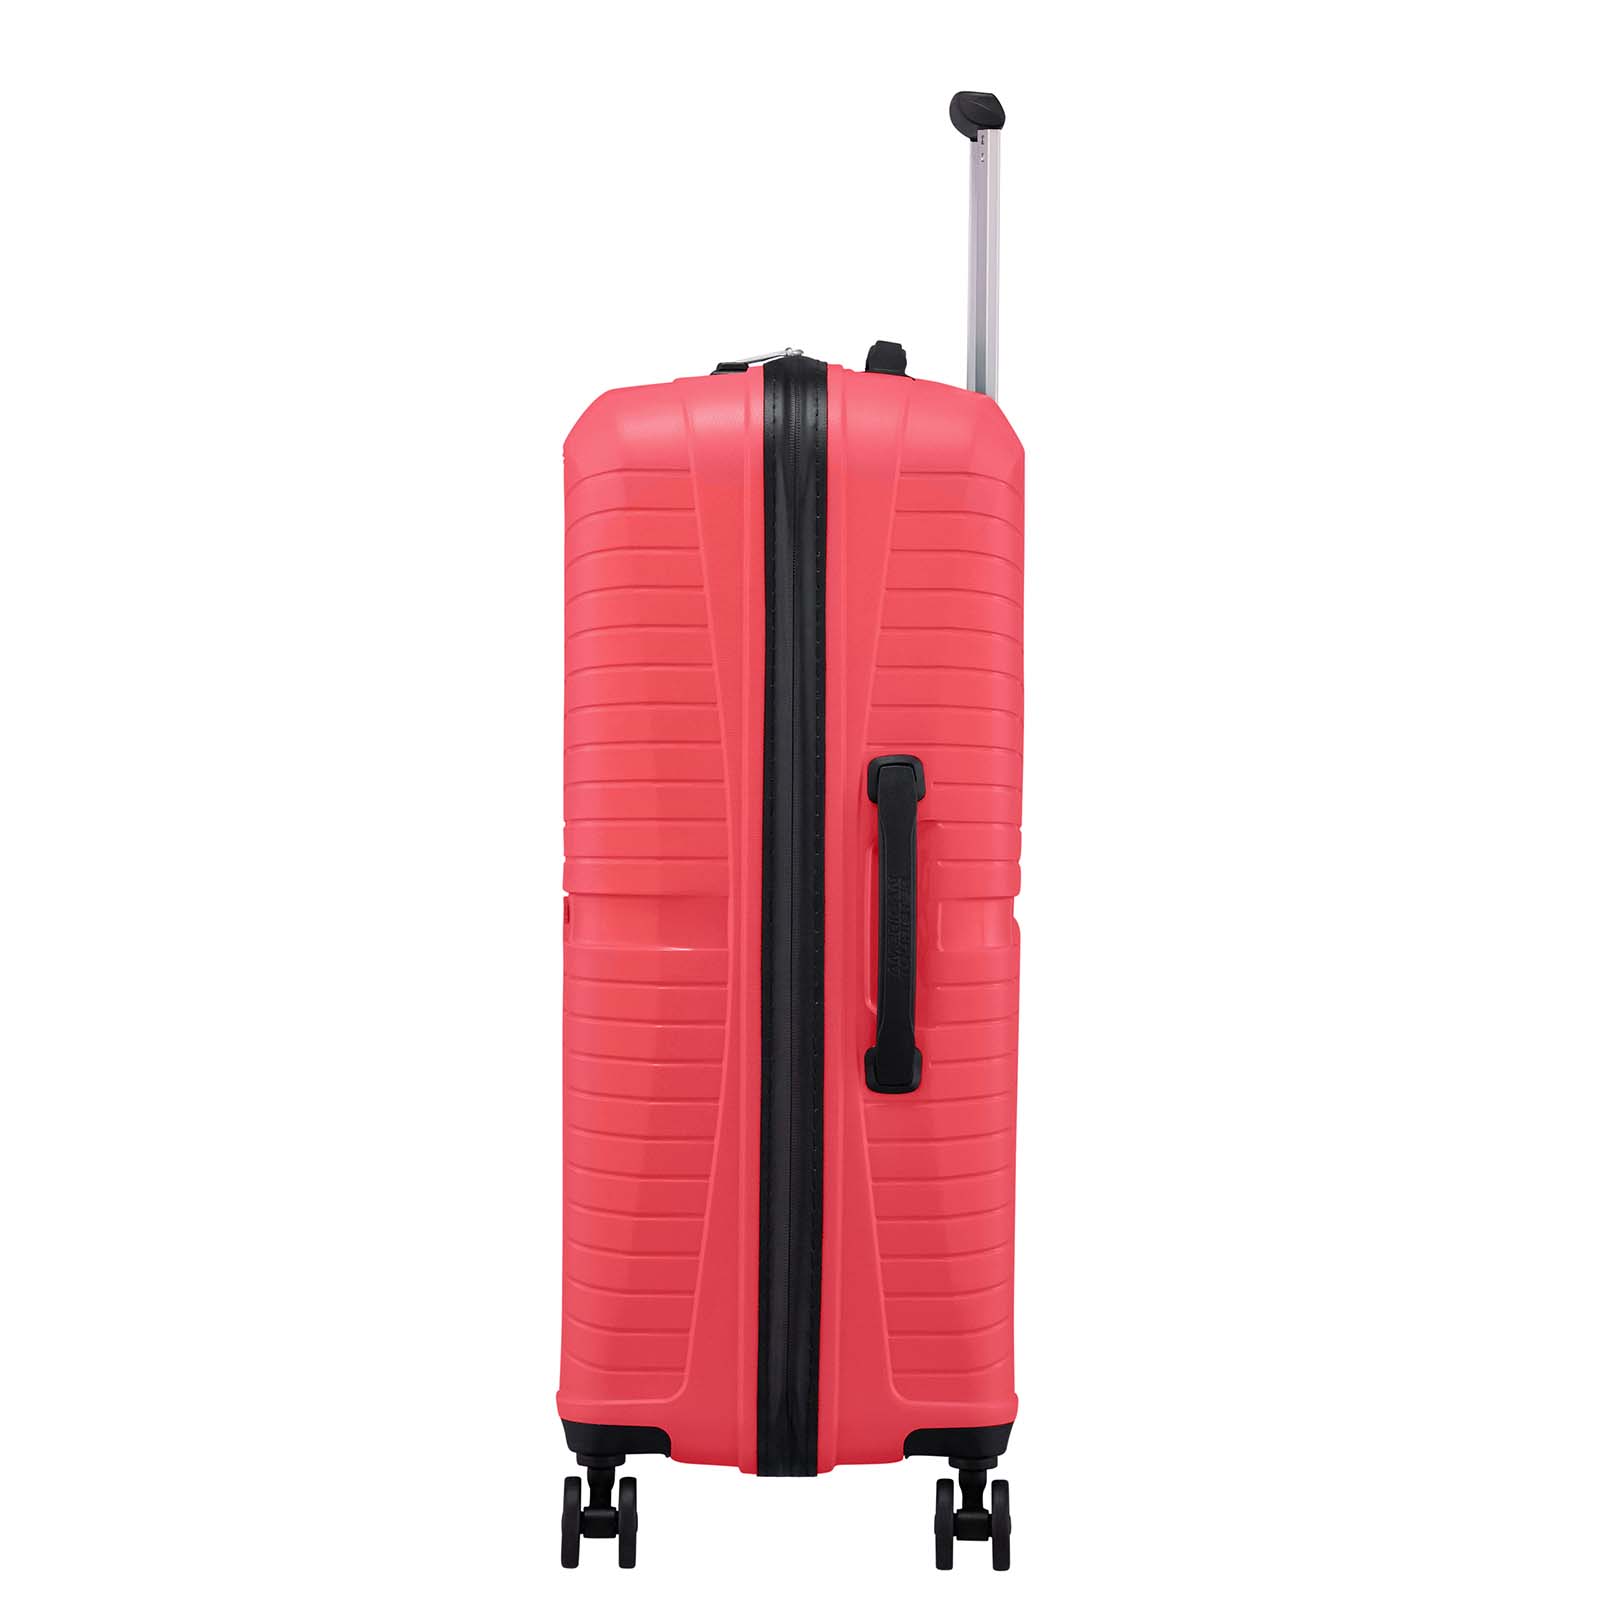 American-Tourister-Airconic-67cm-Suitcase-Paradise-Pink-Side